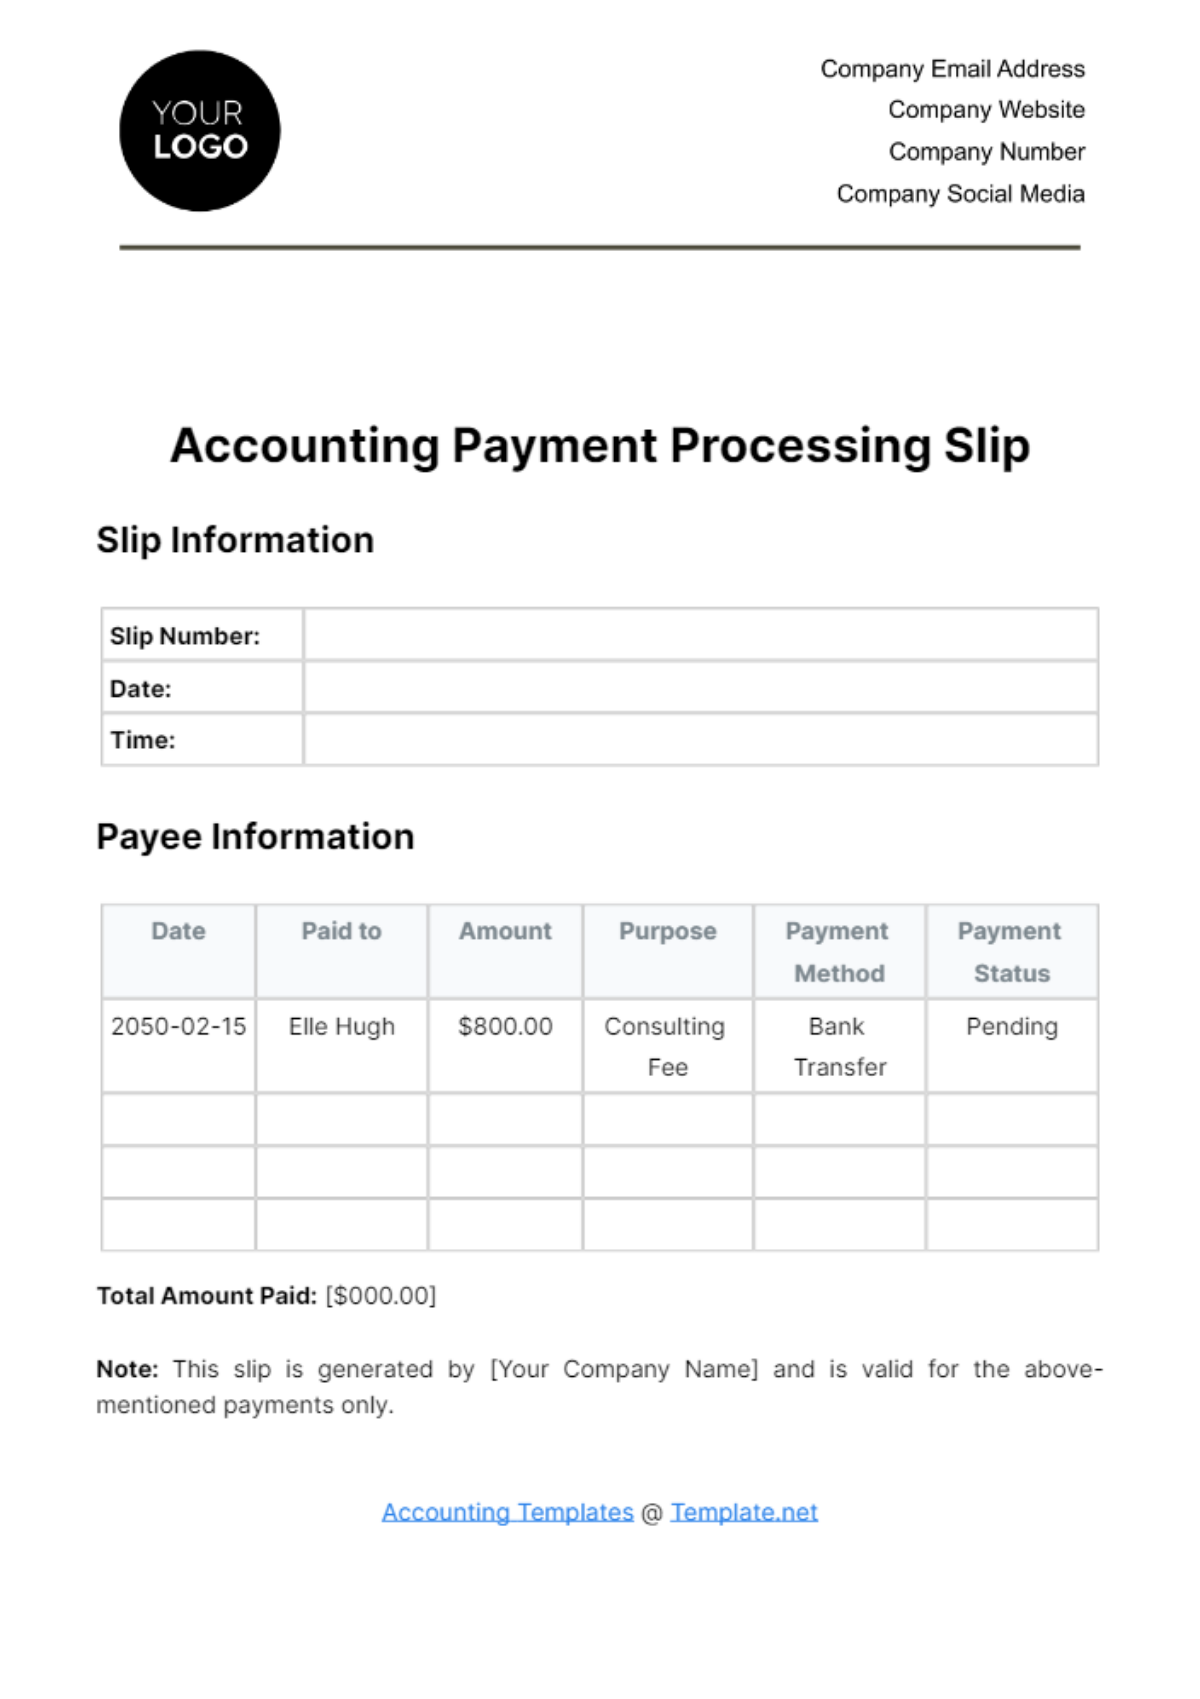 Accounting Payment Processing Slip Template